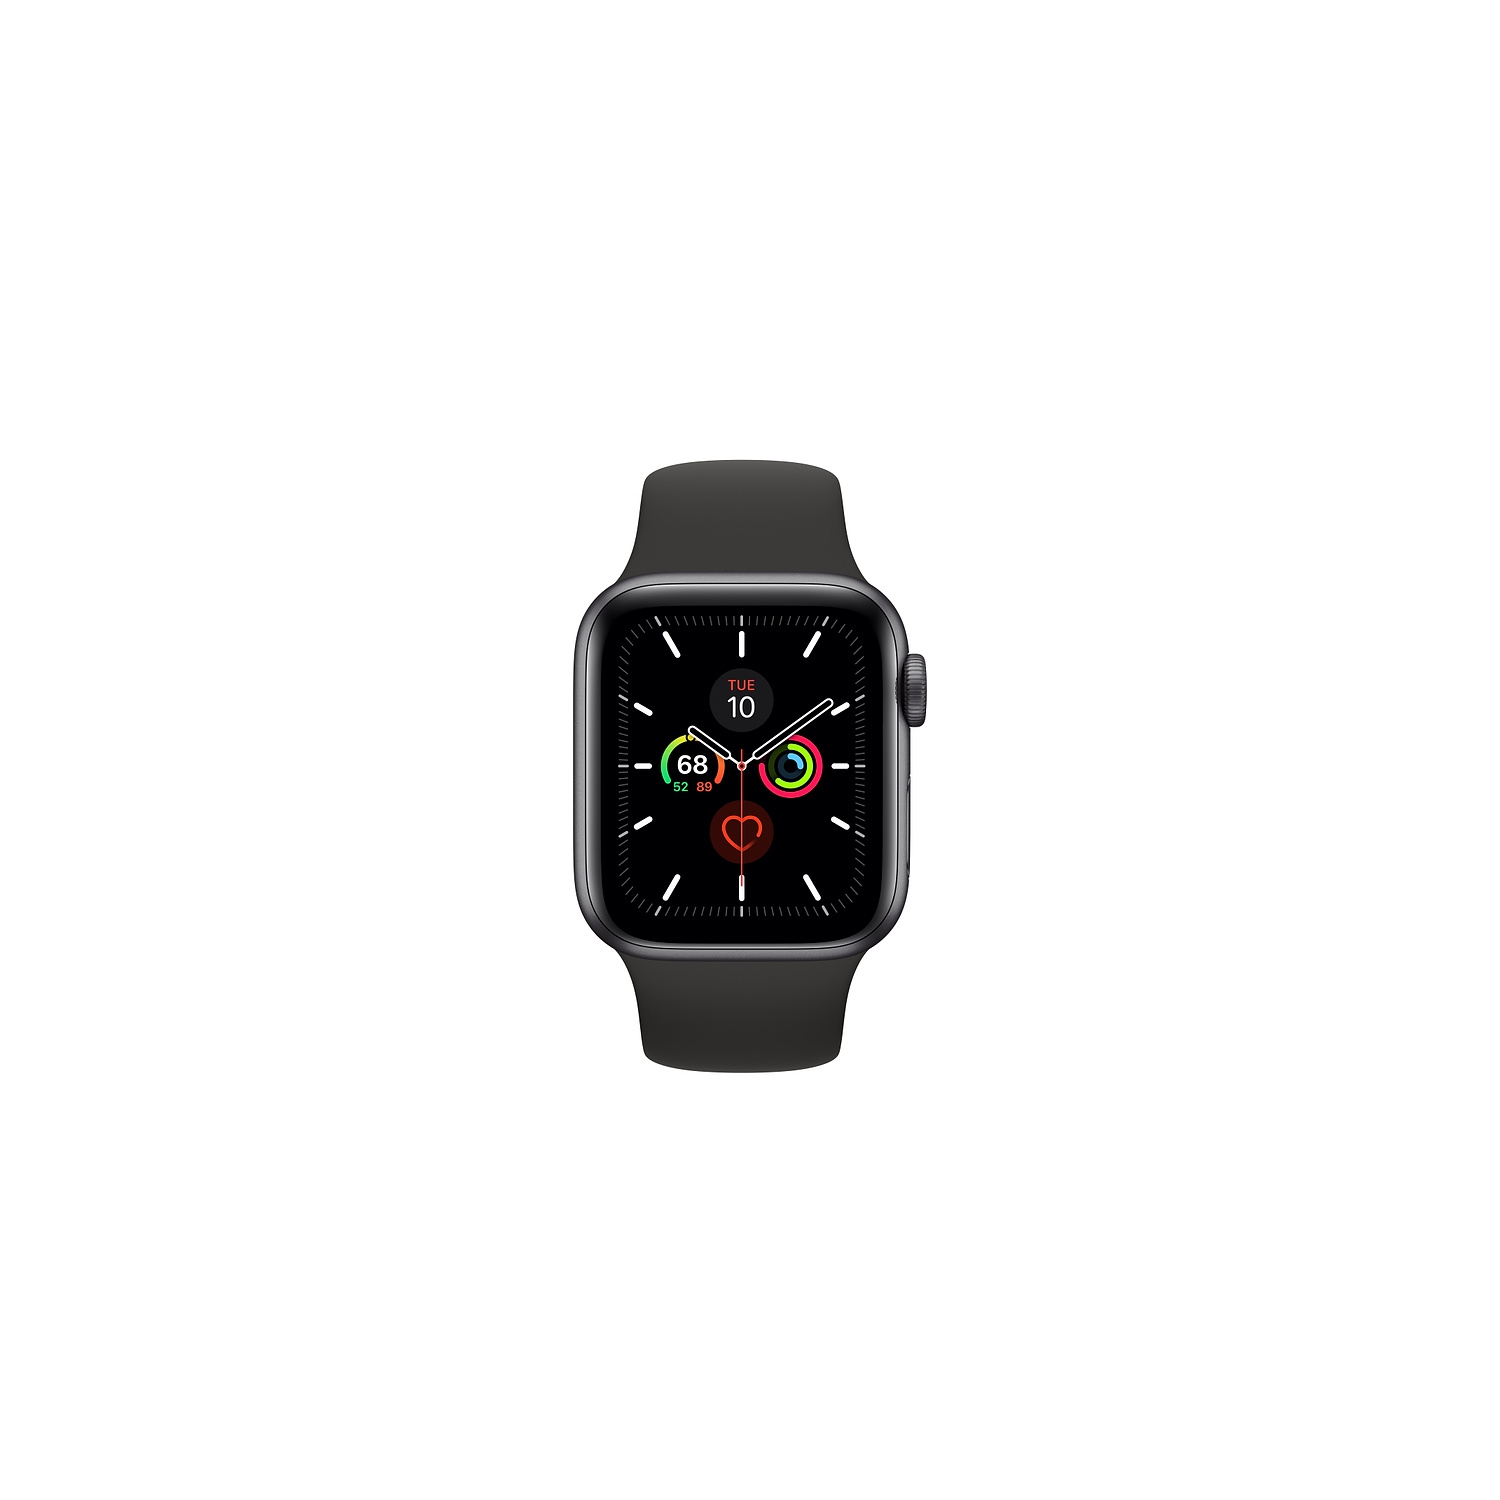 Refurbished (Excellent) - Apple Watch Series 5 (GPS) 40mm Space Grey Aluminum with Black Sport Band - Certified Refurbished